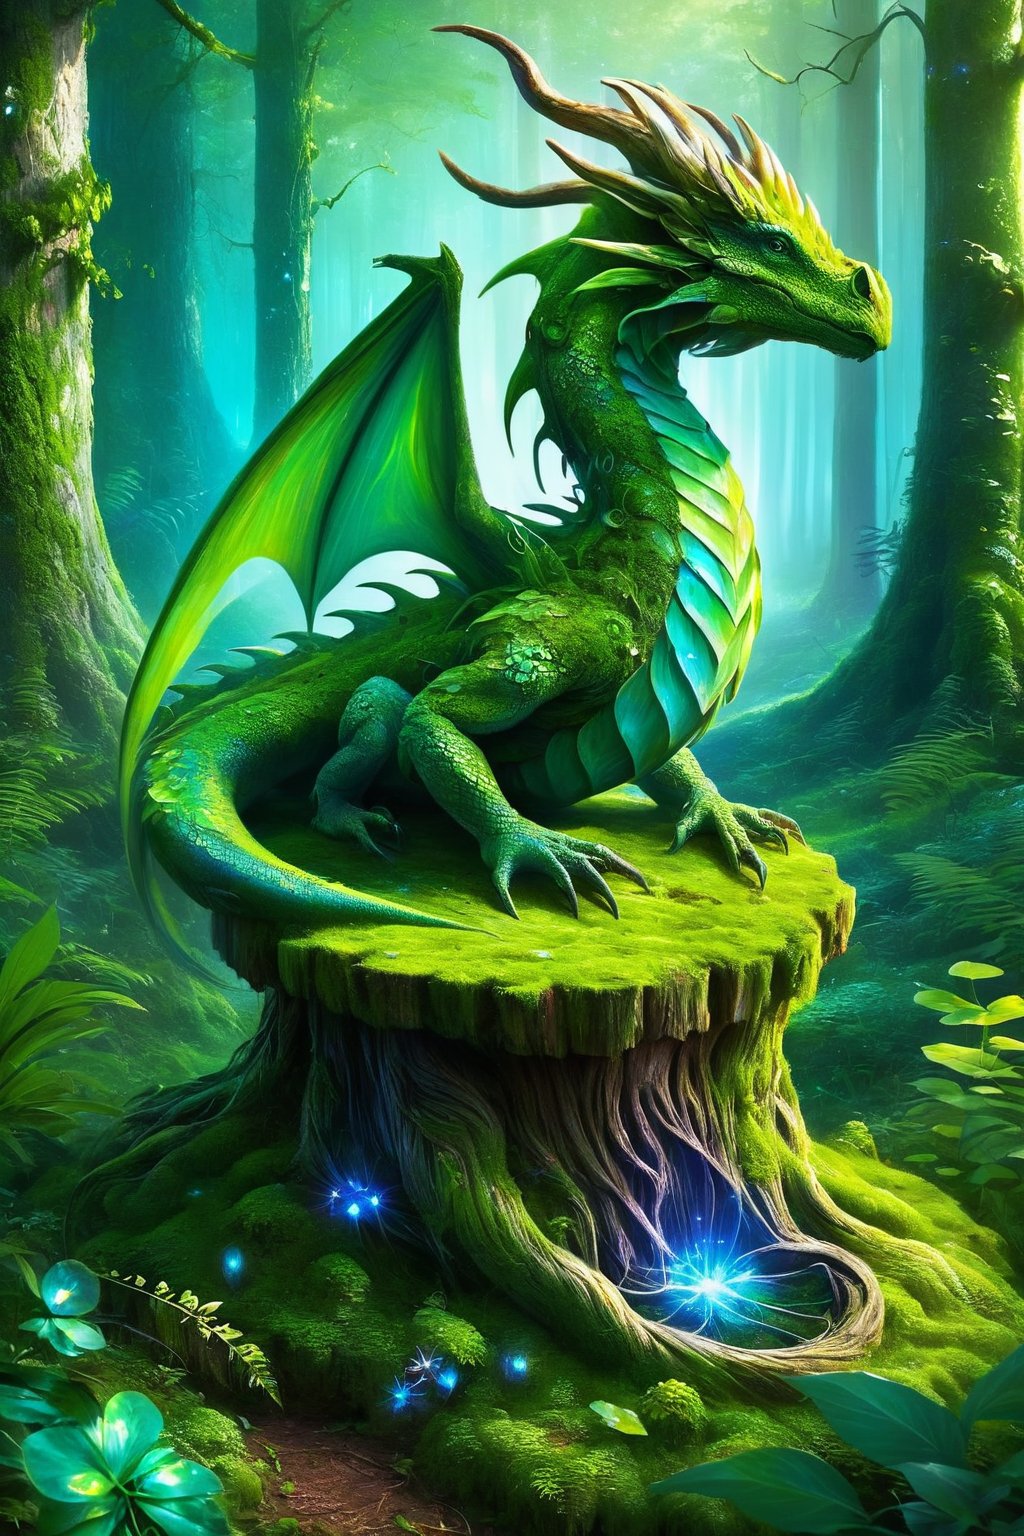 draco_fantasy, a mystical forest dragon, forest guardian, interwined vines, perched atop an ancient tree stump in a moss-covered clearing. Bioluminescent mushrooms illuminate the scene as the dragon gazes intently at a hidden crystal emanating an ethereal light. (Mysterious and magical),<lora:EMS-303441-EMS:0.500000>